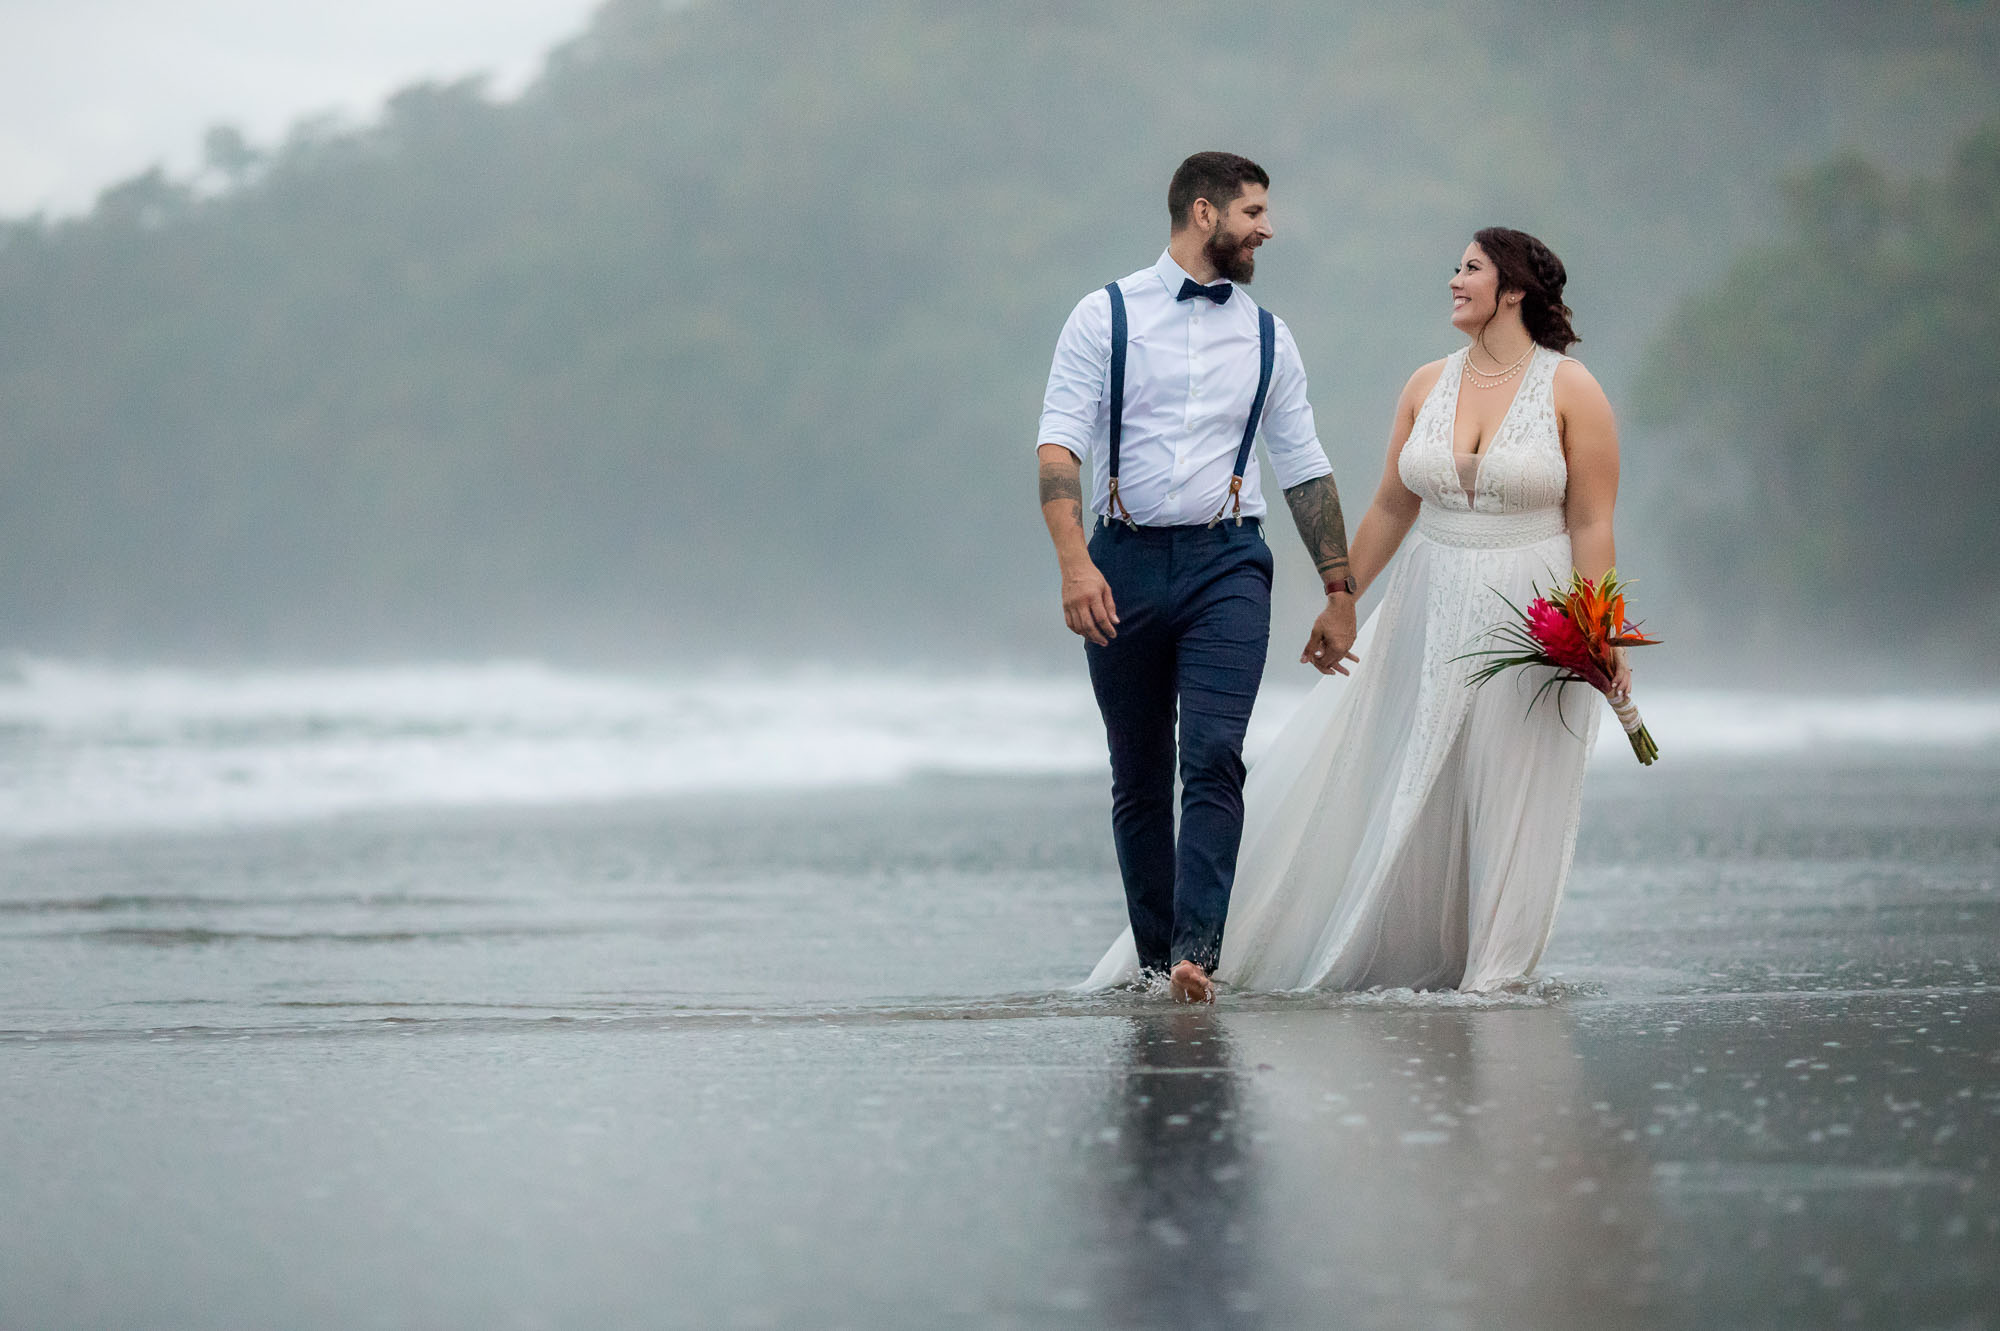 Bride and groom walk along the beach for their elopement wedding